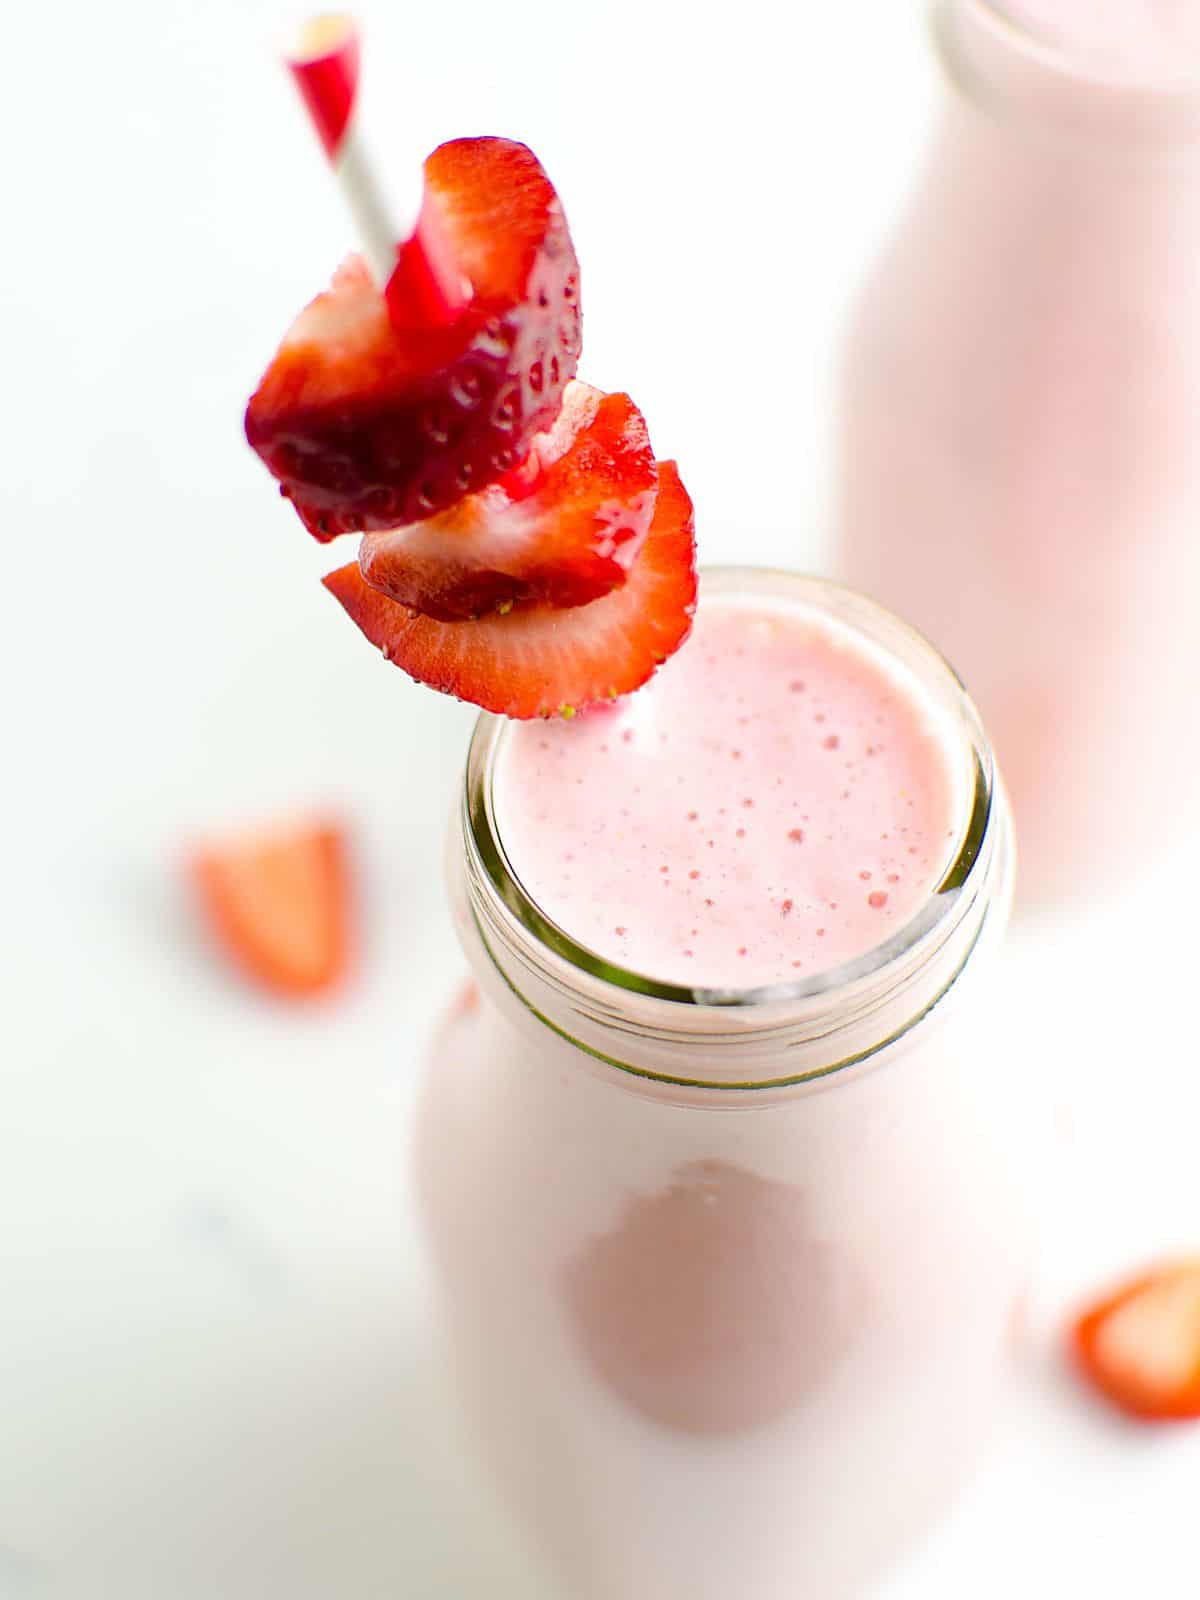 strawberry protein shake in a  glass garnished with fresh strawberries.